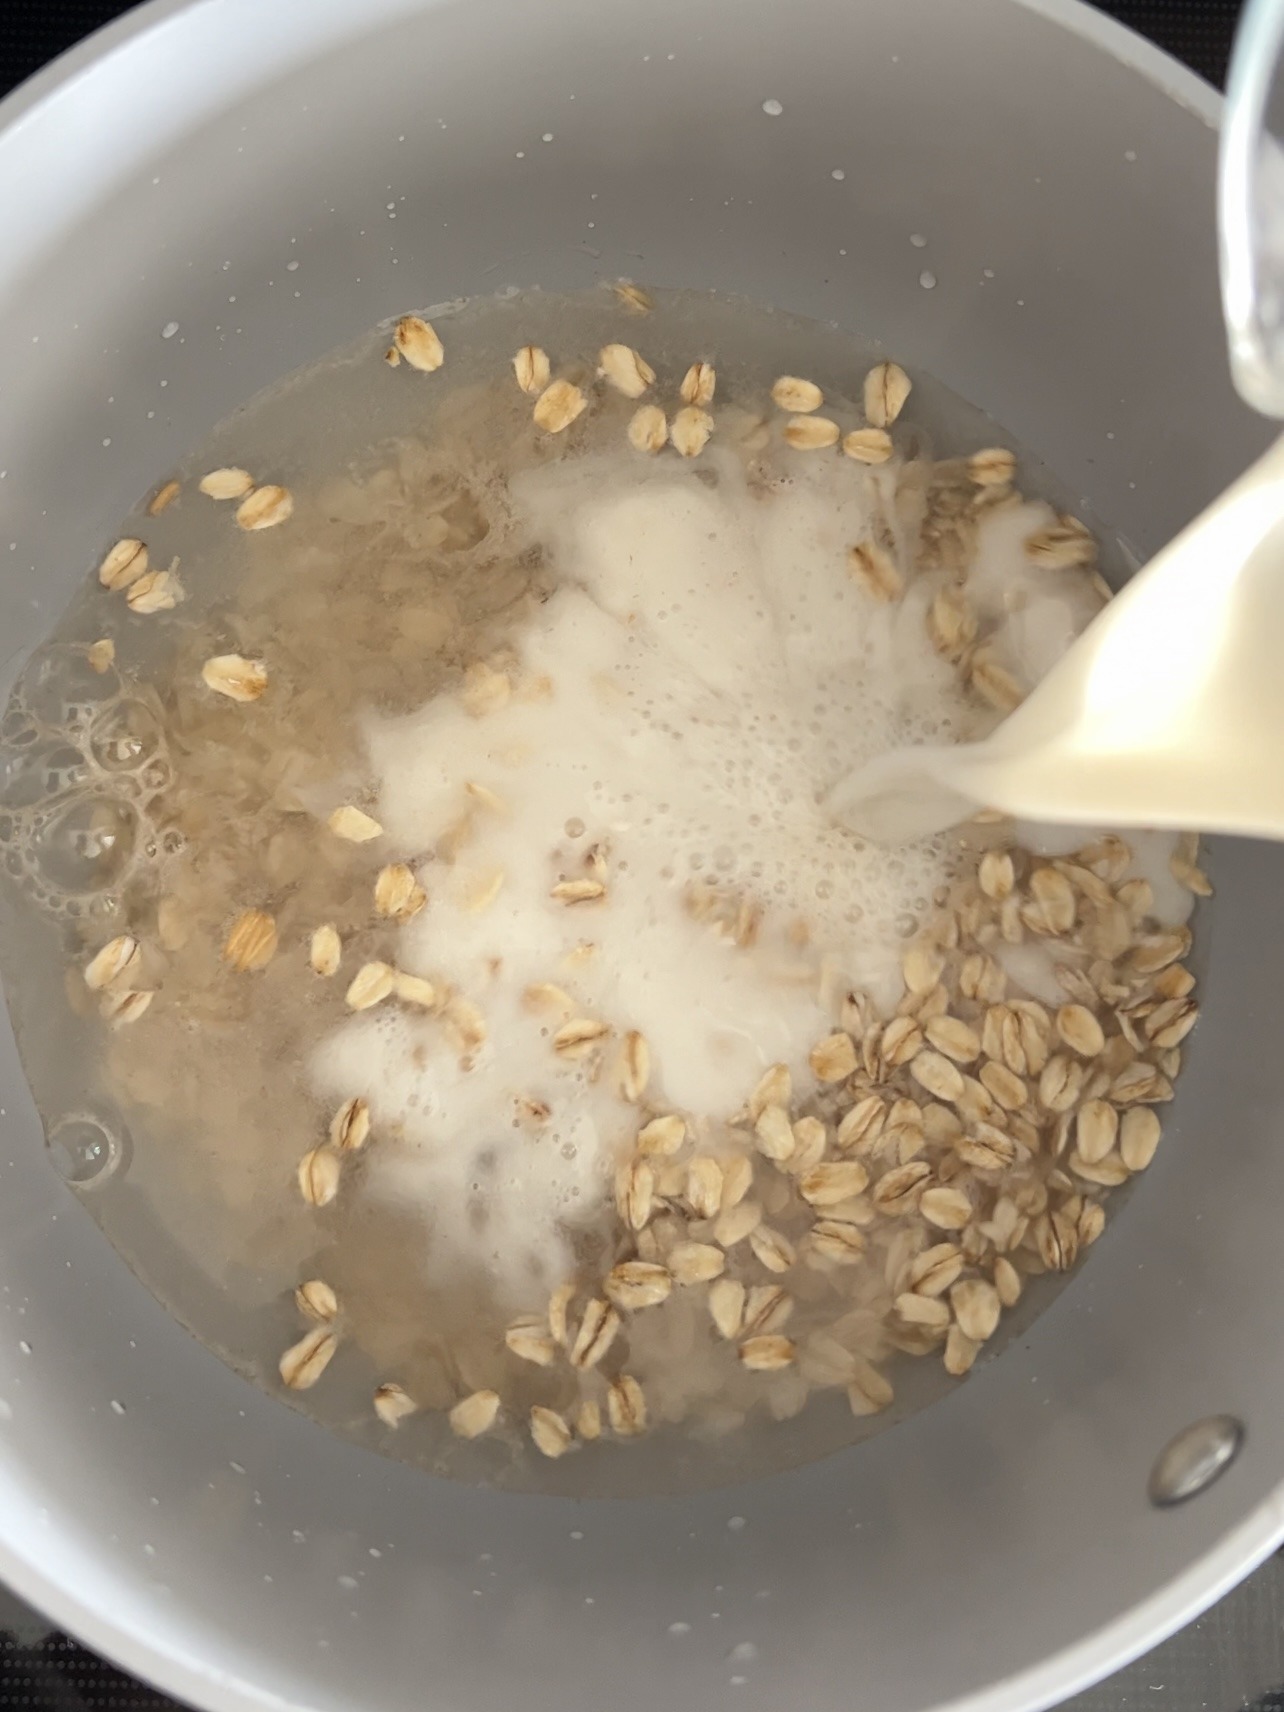 How To Make Vegan Protein Oats Step 1: Heat the oats, water, and milk on the stovetop (preferred) or in the microwave.